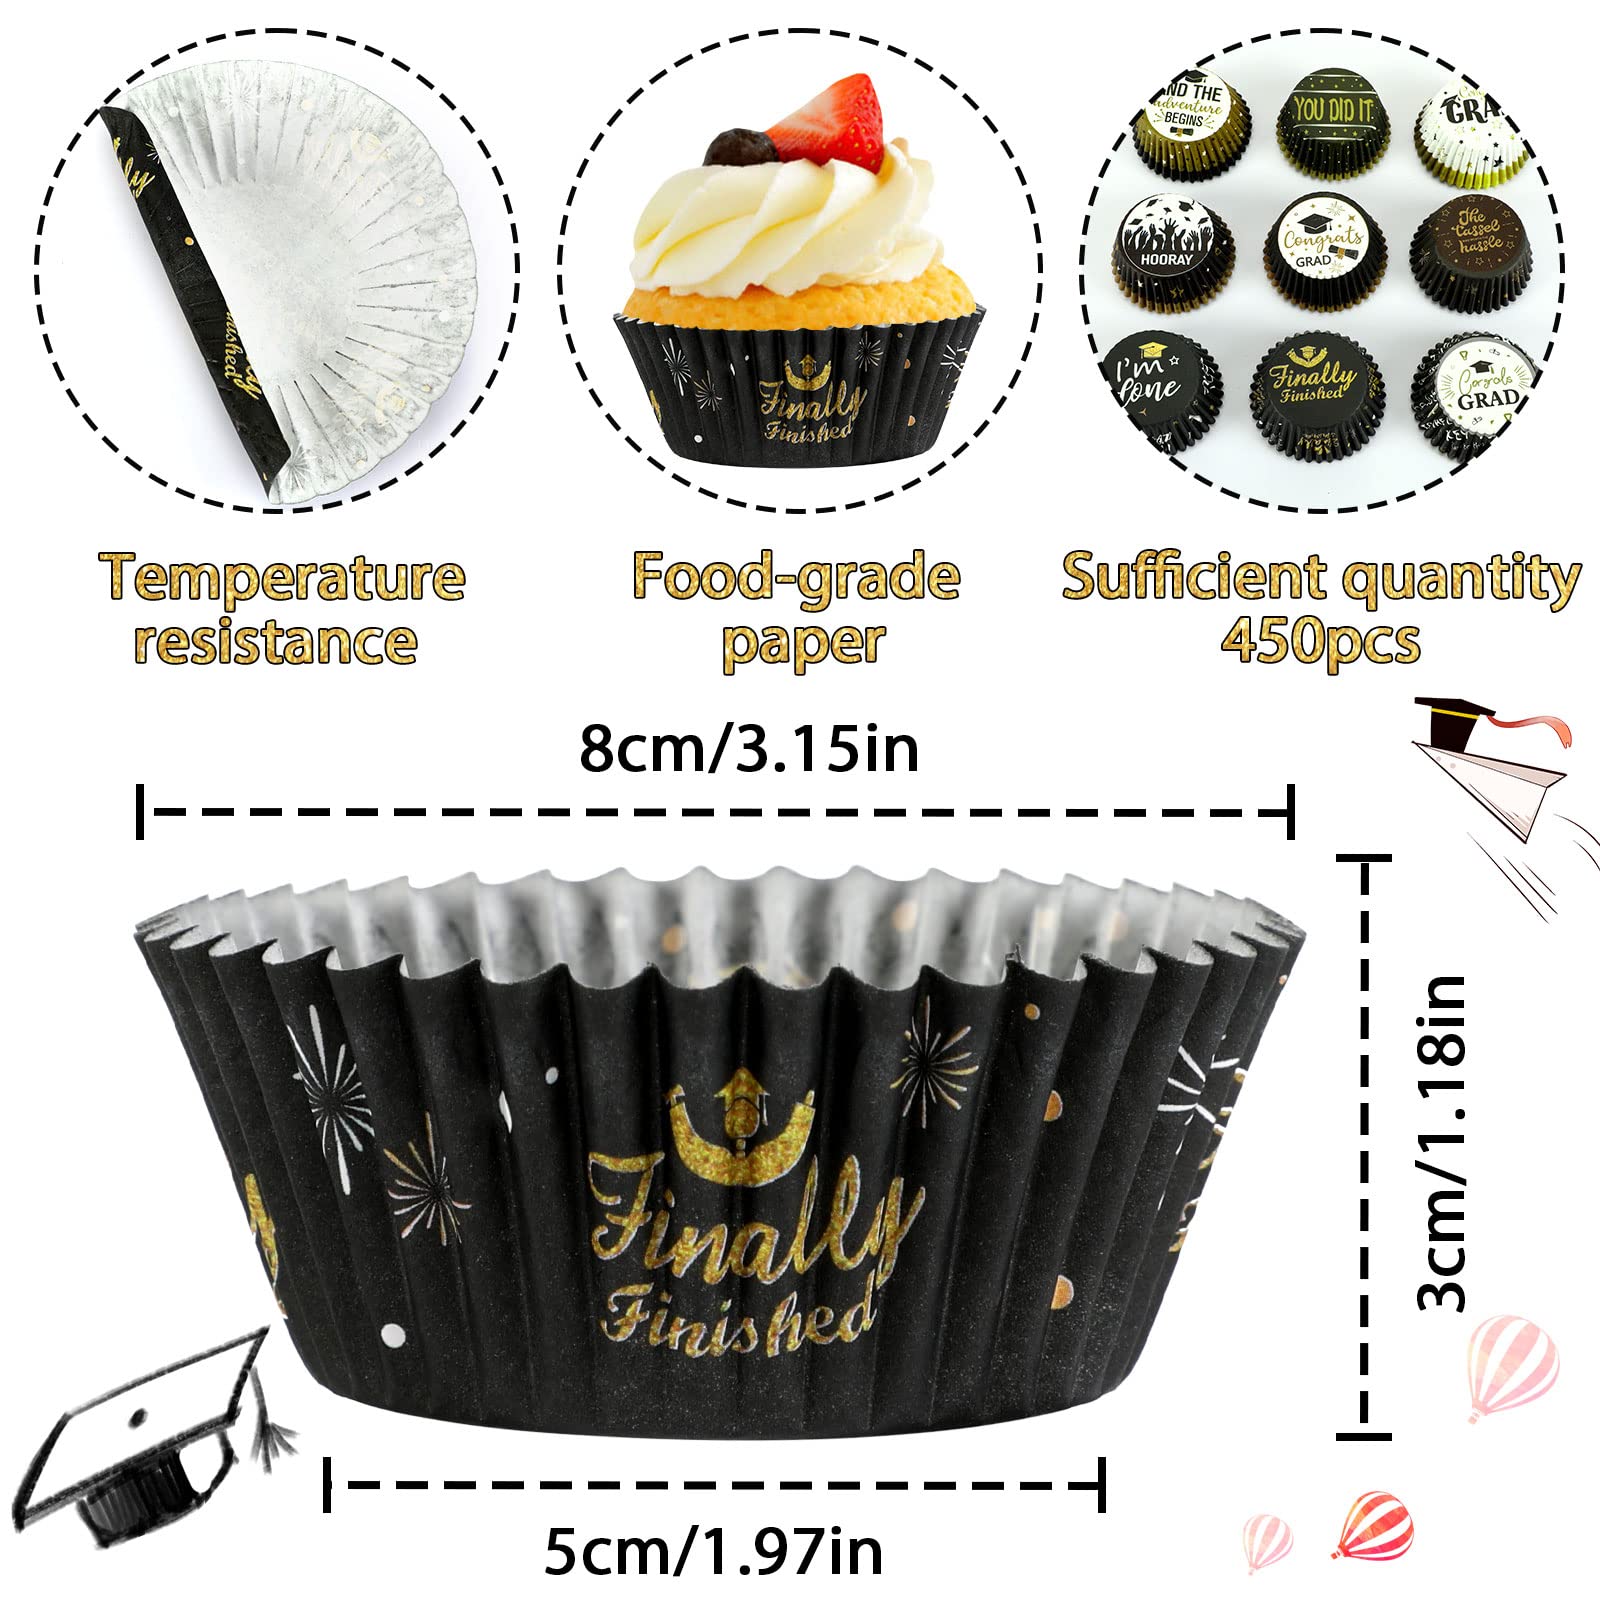 Graduation Cupcake Liners, SANNIX 450pcs Congrats Grad Baking Cups 2023 Cupcake Wrappers Paper Wraps Muffin Liners for Graduation Birthday Party Candy Cake Decorations Supplies (9 Designs)